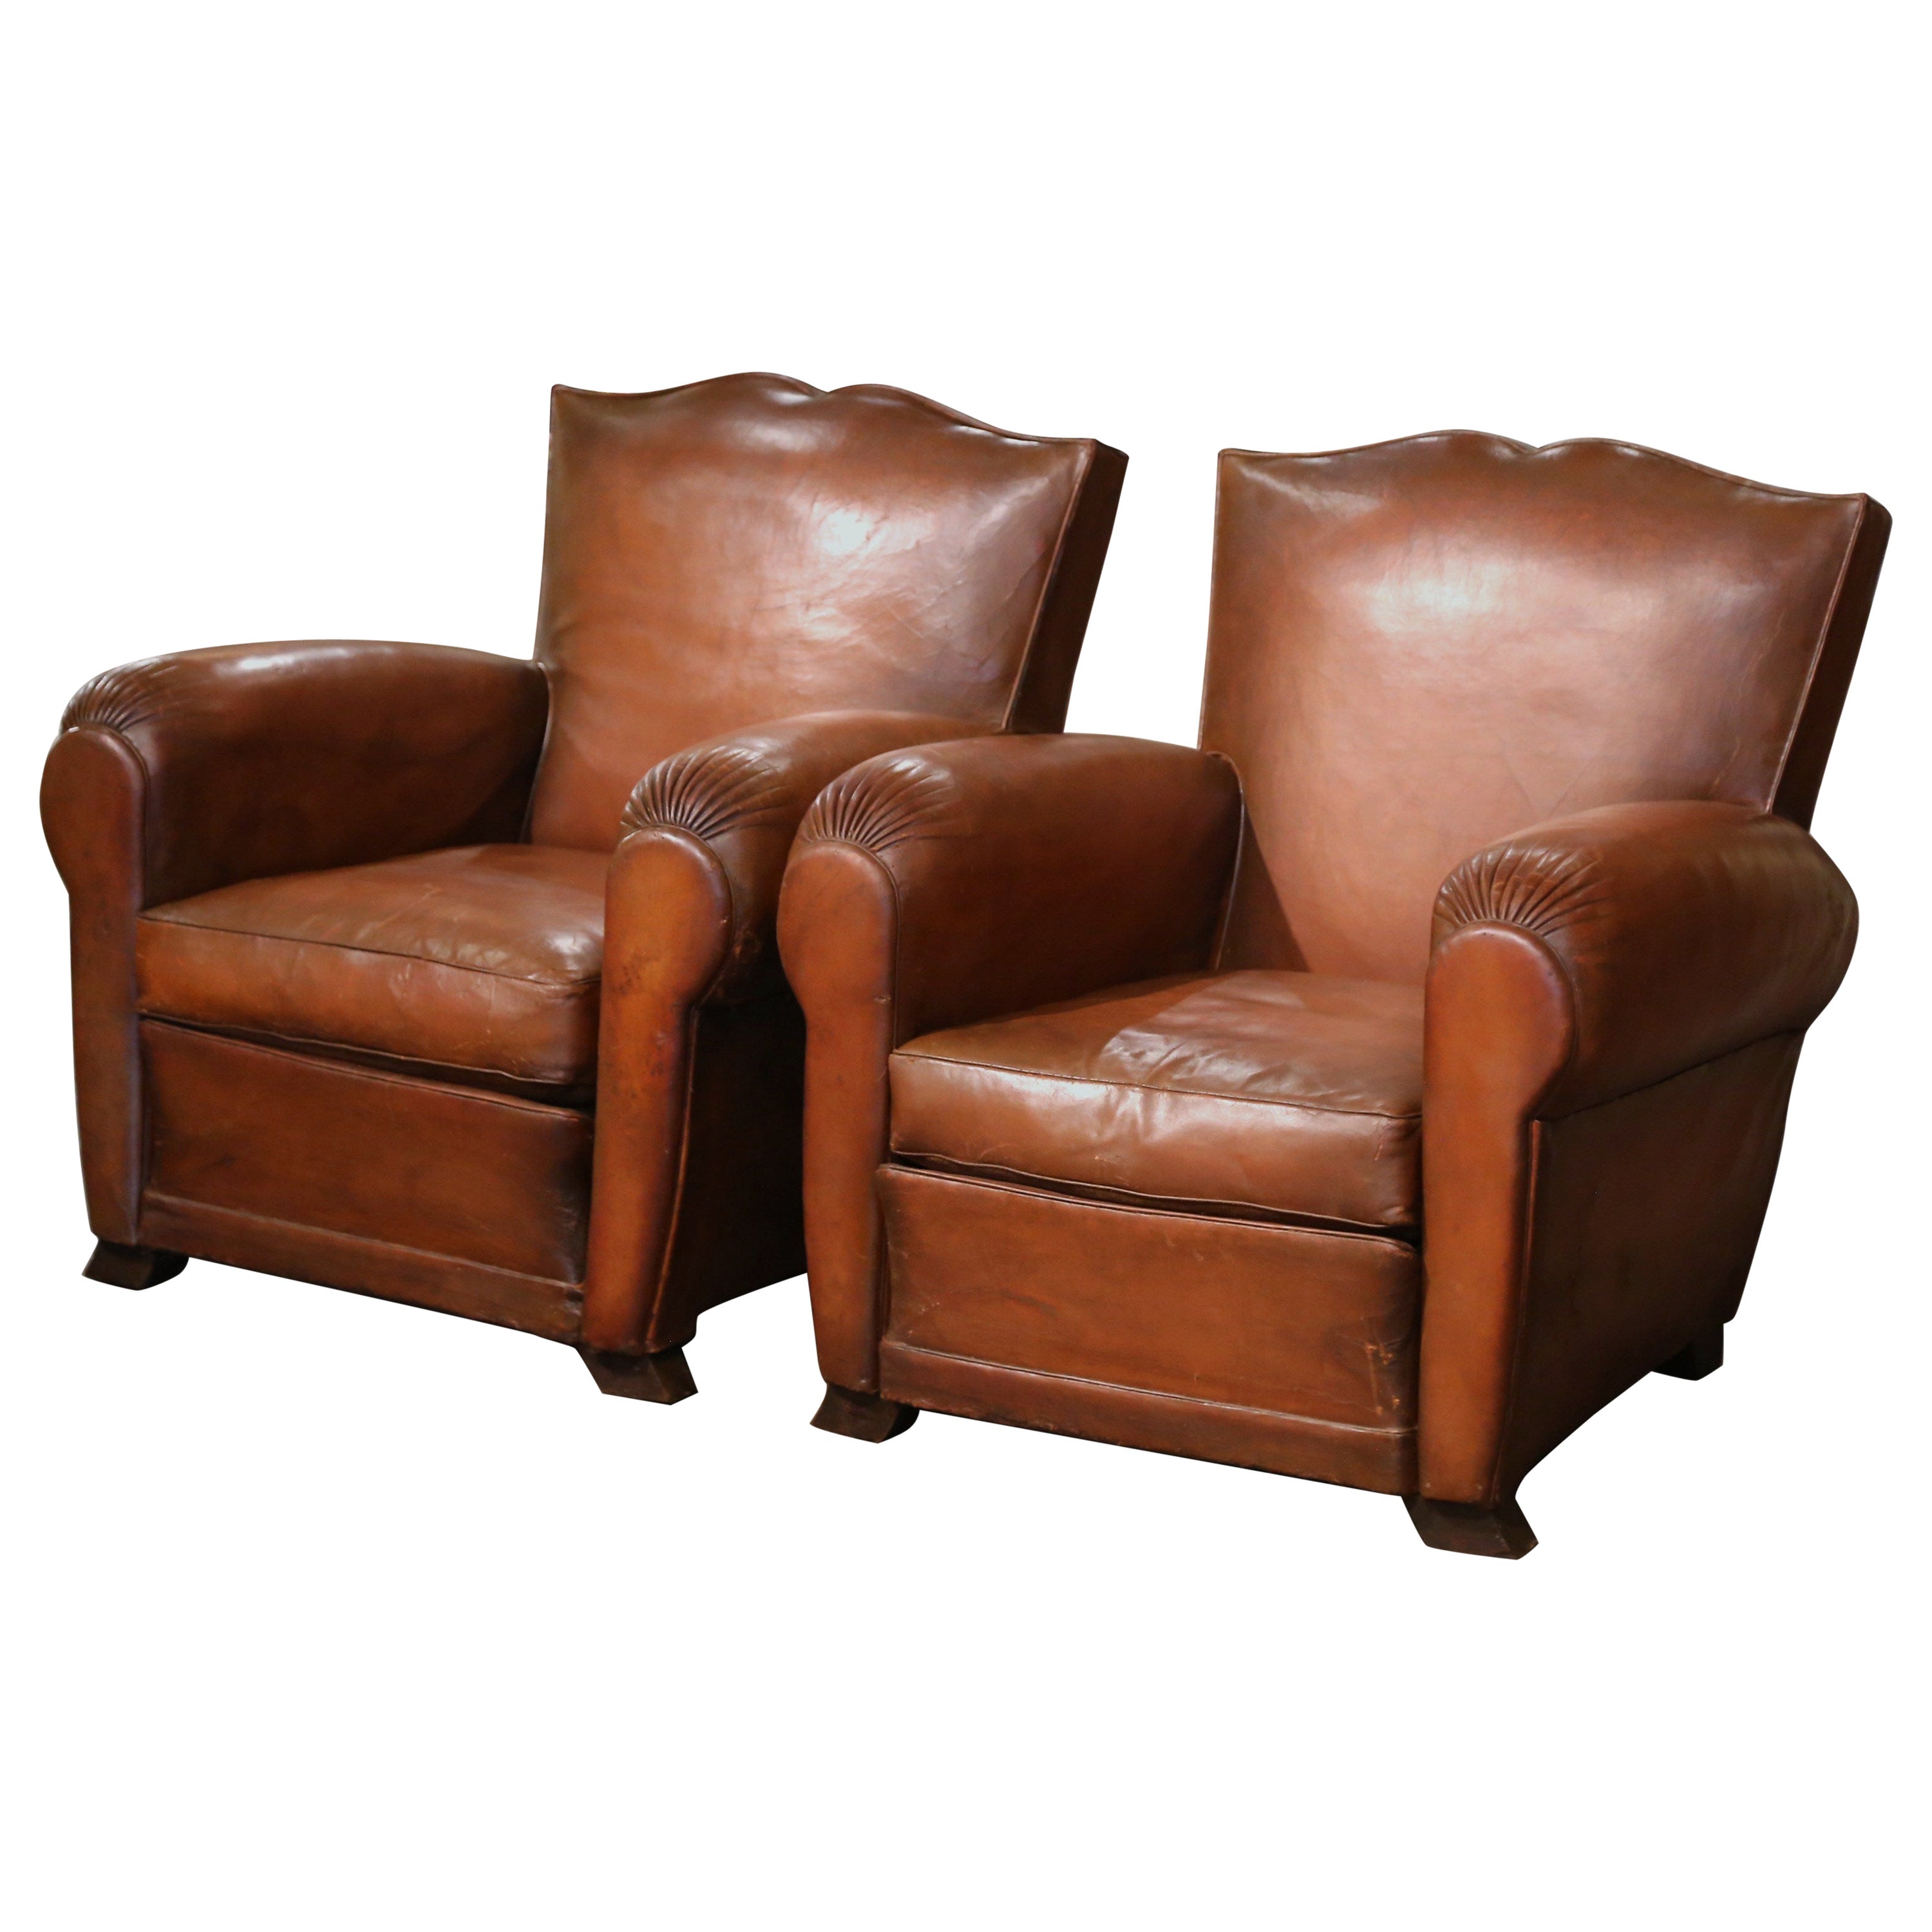 Pair of Early 20th Century French Brown Leather Club Armchairs "Moustache Syle"